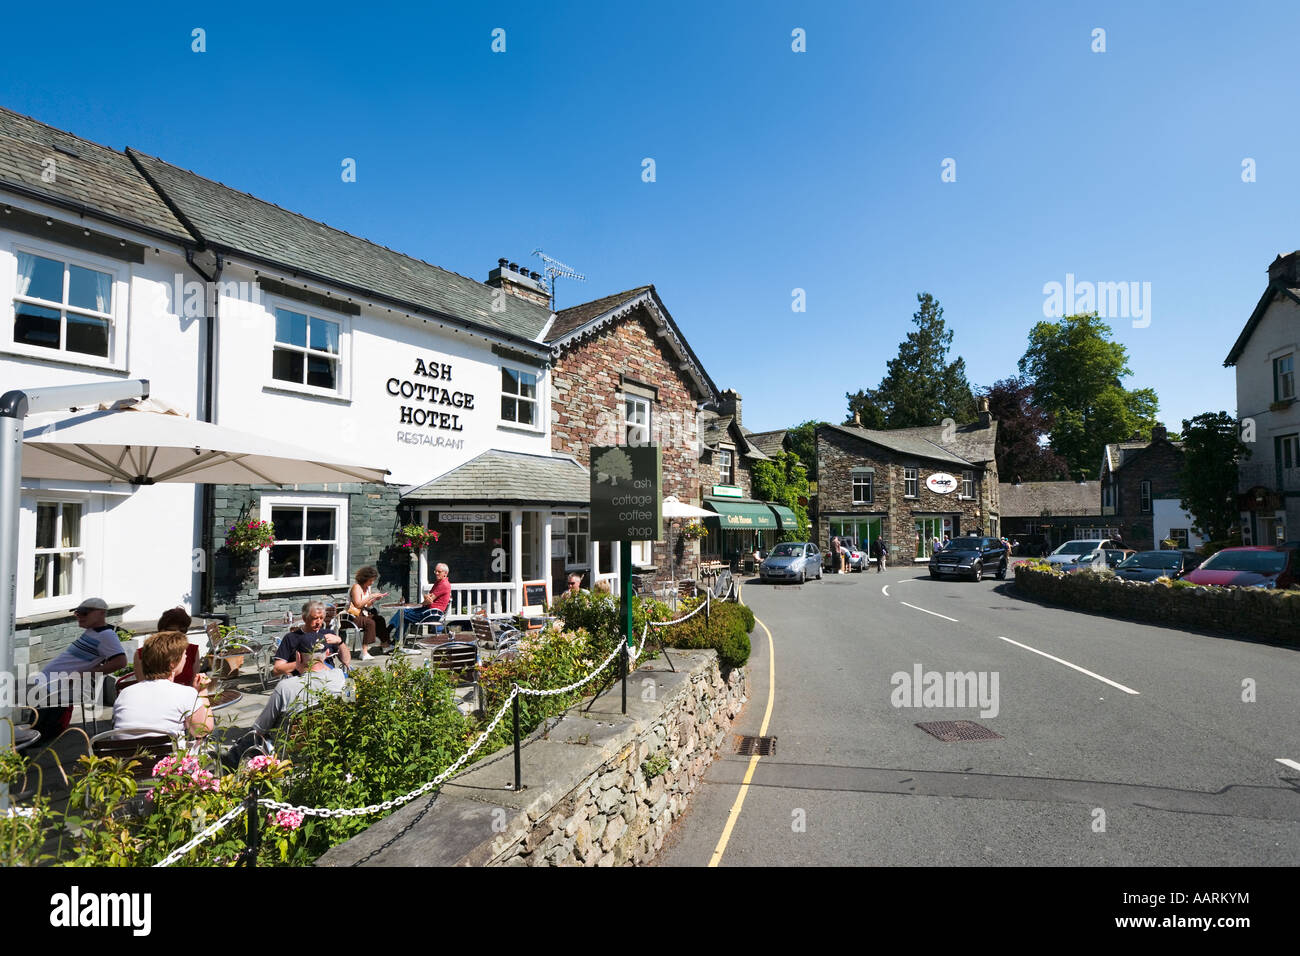 Ash Cottage Hotel and Coffee Shop, Grasmere, Lake District, Cumbria, England, UK Stock Photo